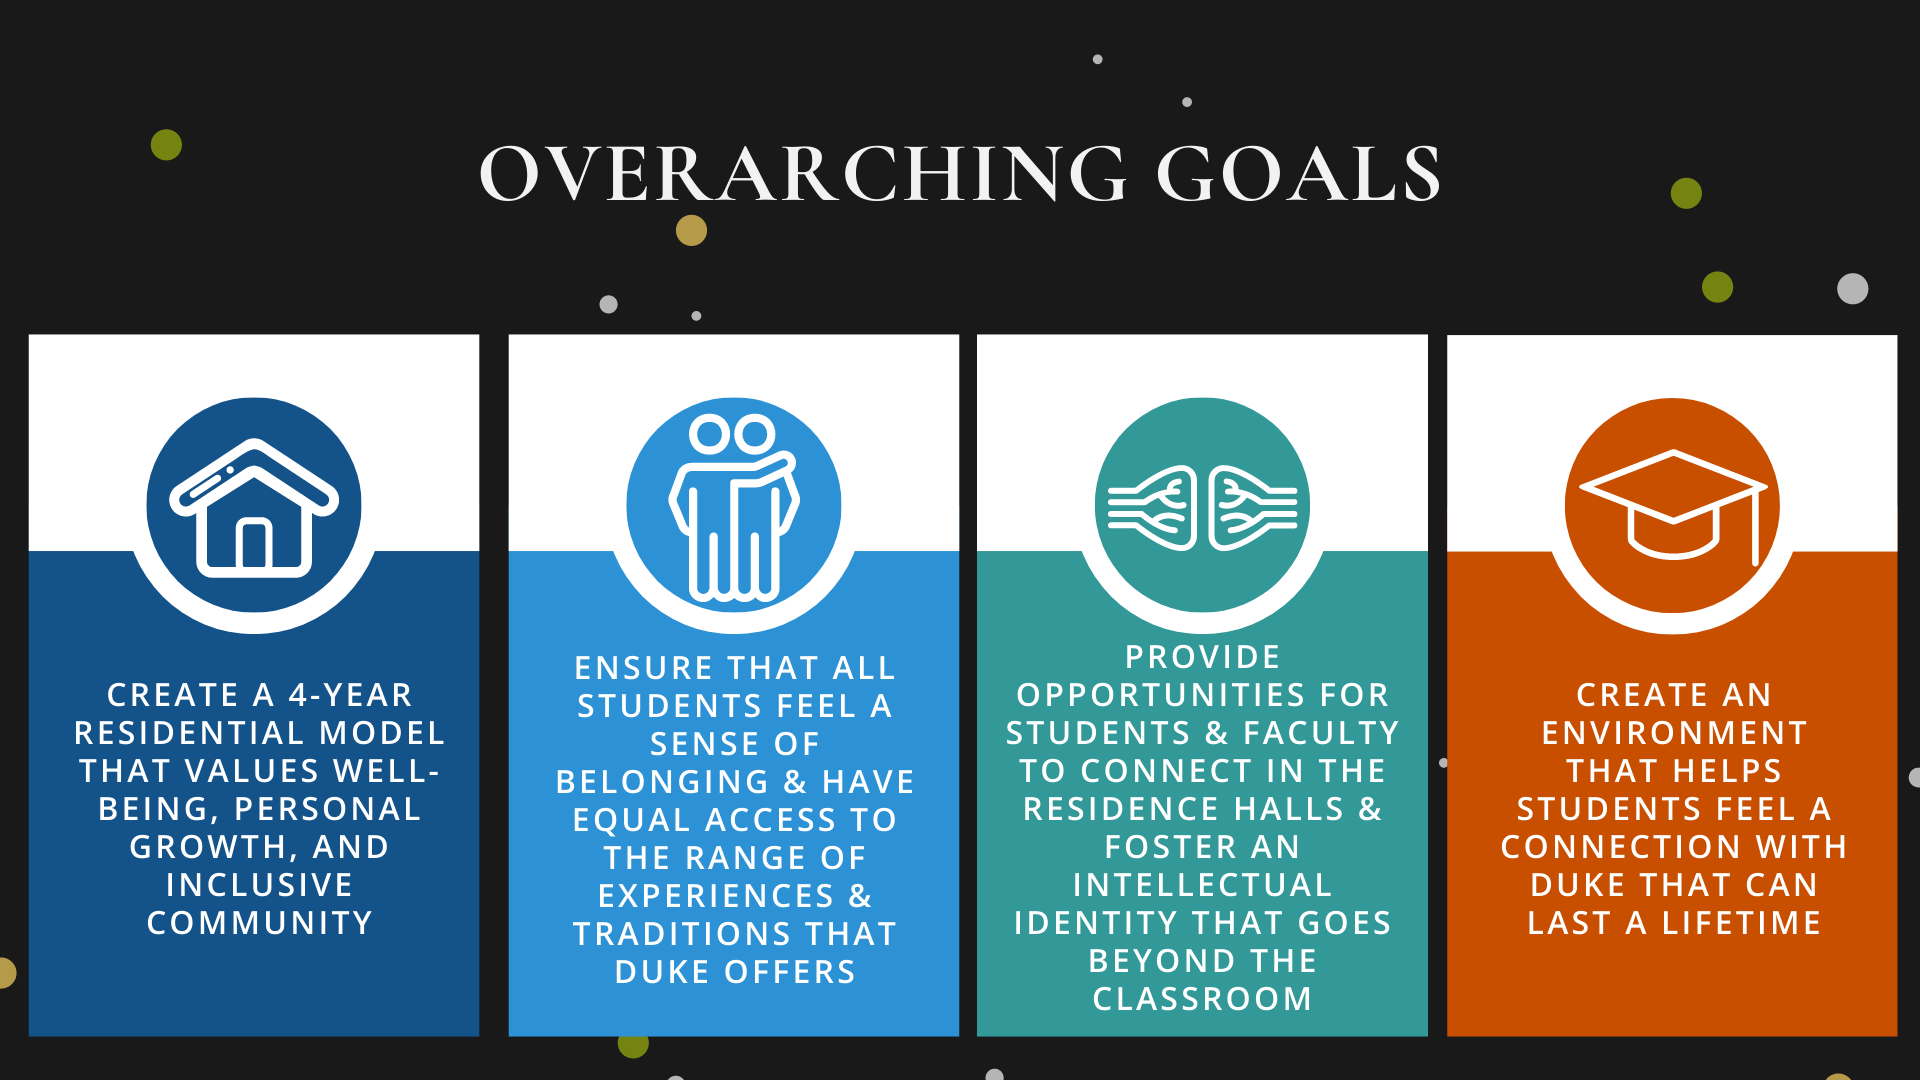 four overarching goals of Next Generation Living and Learning Experience: Four overarching goals: first, create a four-year residential model that values well-being, personal growth, and inclusive community. Second, ensure that all students feel a sense of belonging and have equal access to the range of experiences and traditions that Duke offers. Third, provide opportunities for students and faculty to connect in the residence halls and foster an intellectual identity that goes beyond the classroom. Fourth, create an environment that helps students feel a connection with Duke that can last a lifetime.